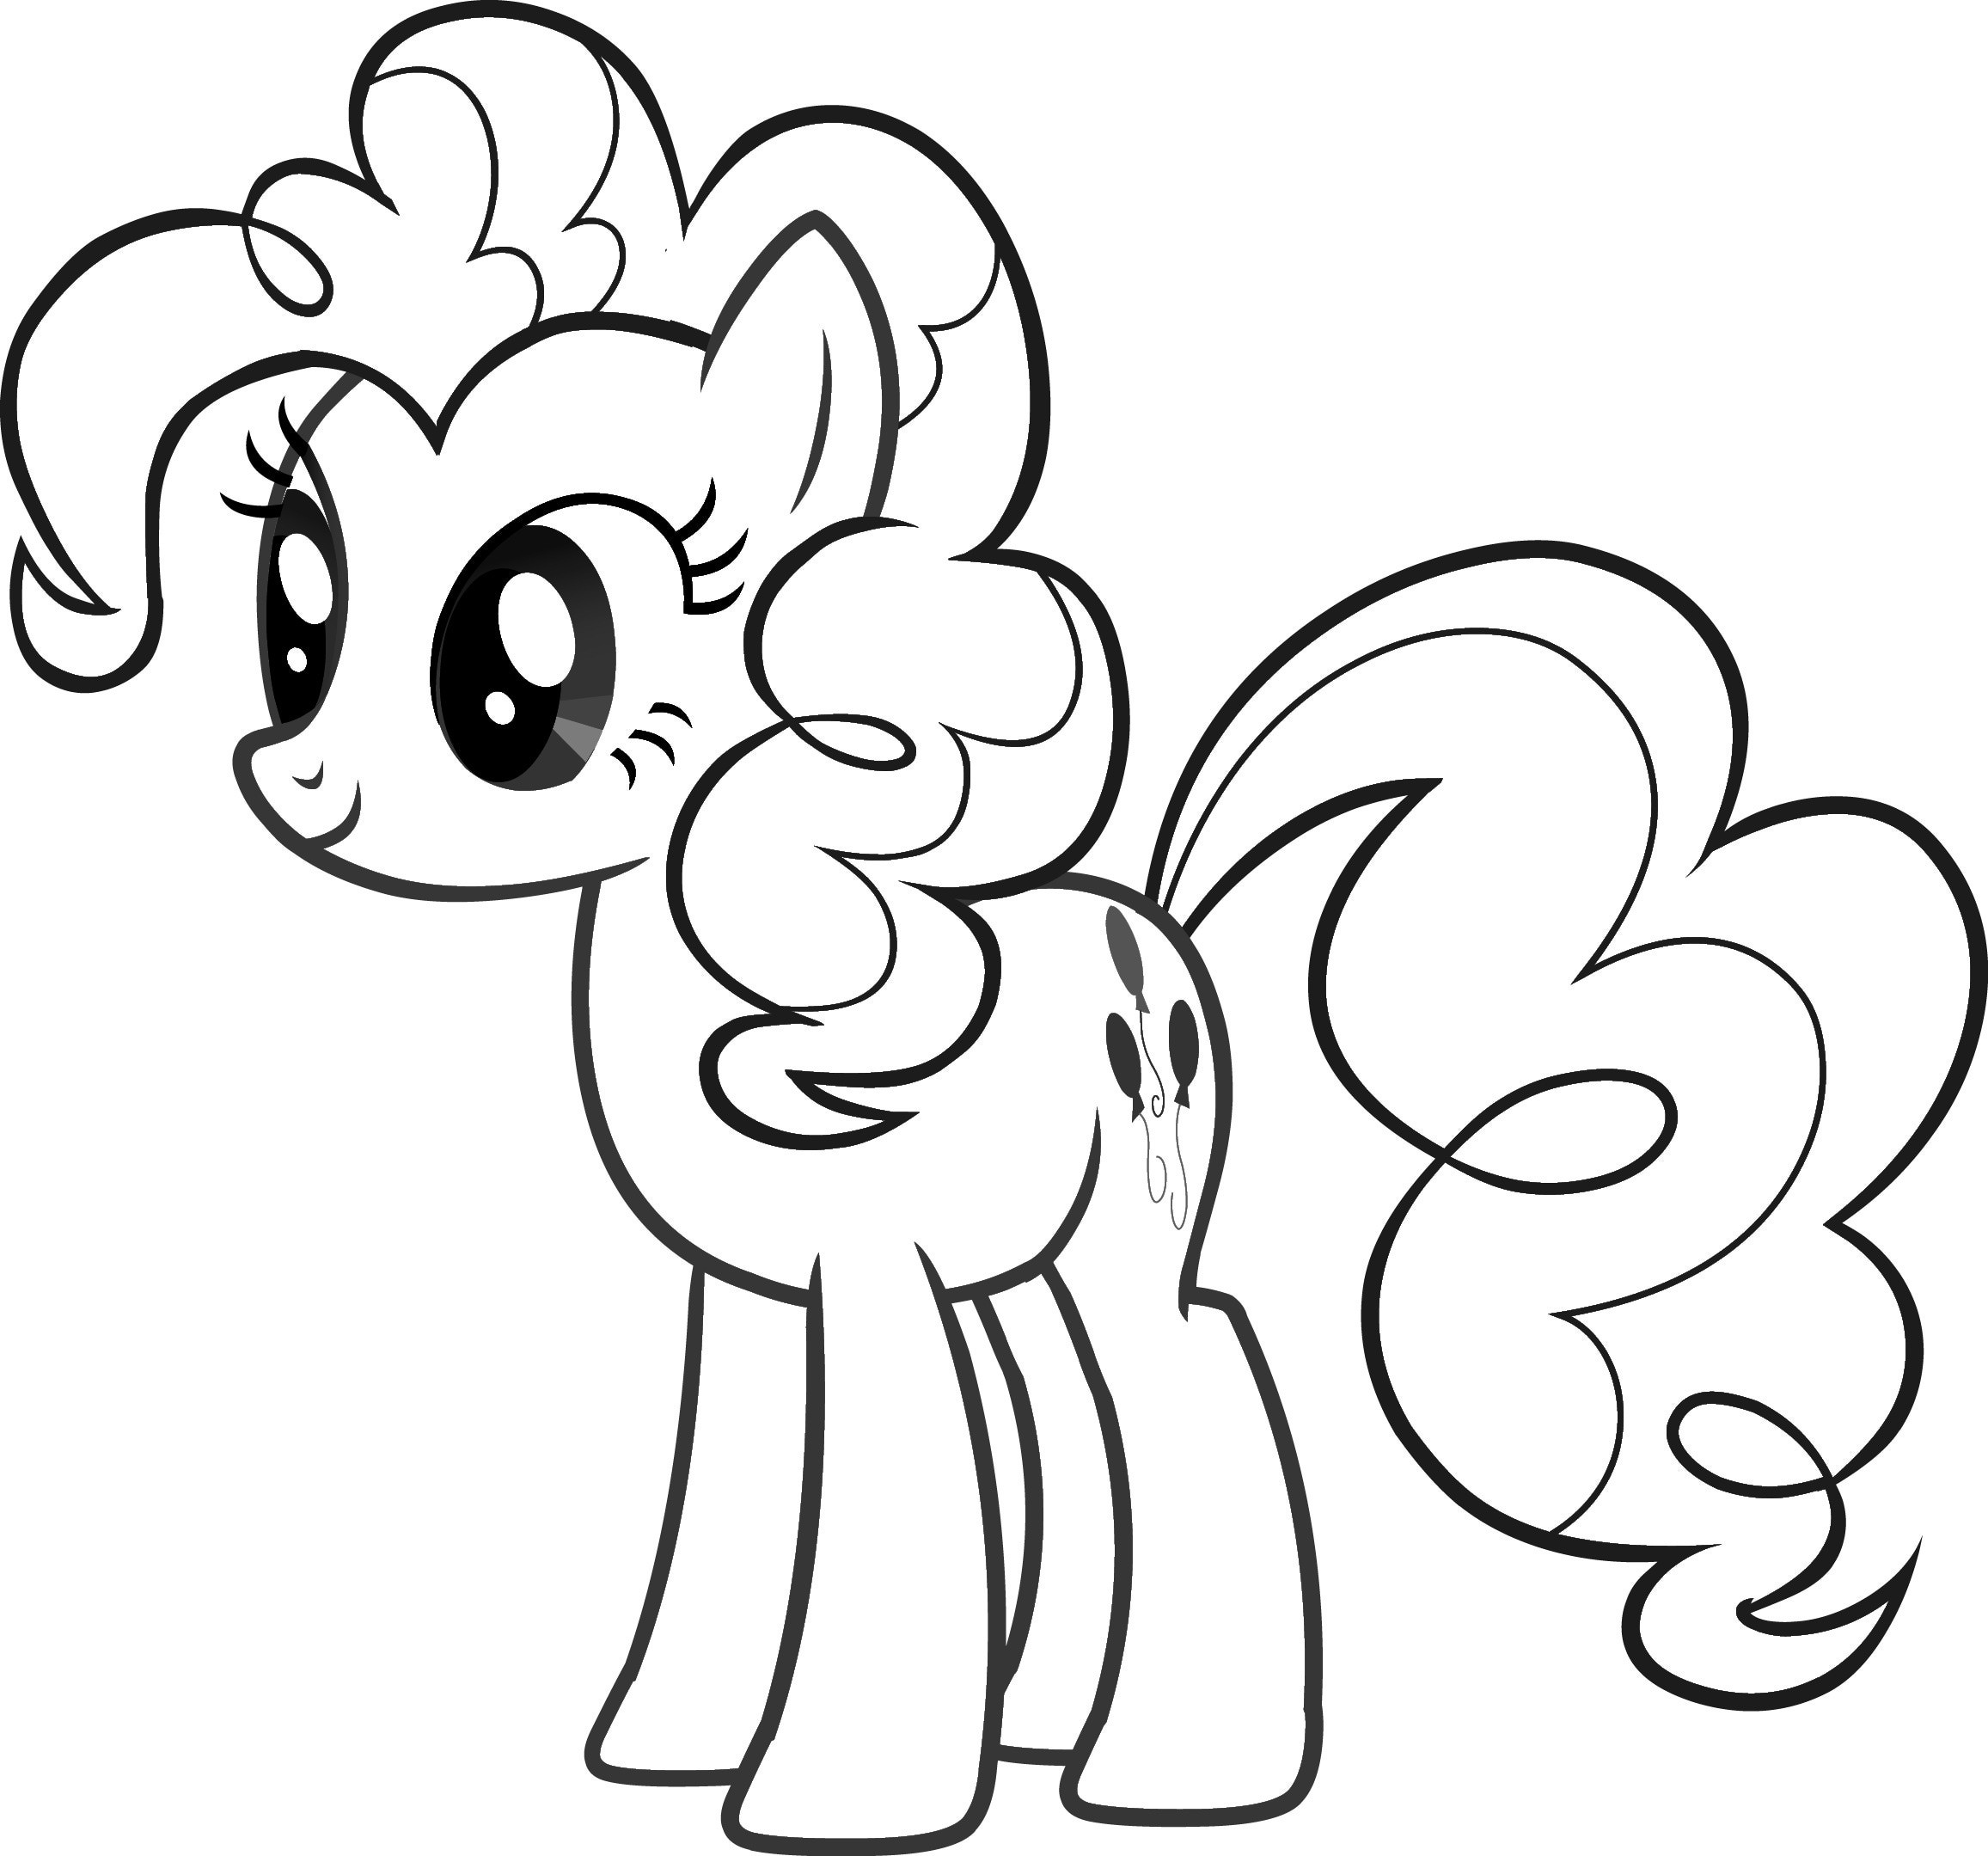 Coloring Pages Little Girls
 My little pony coloring pages